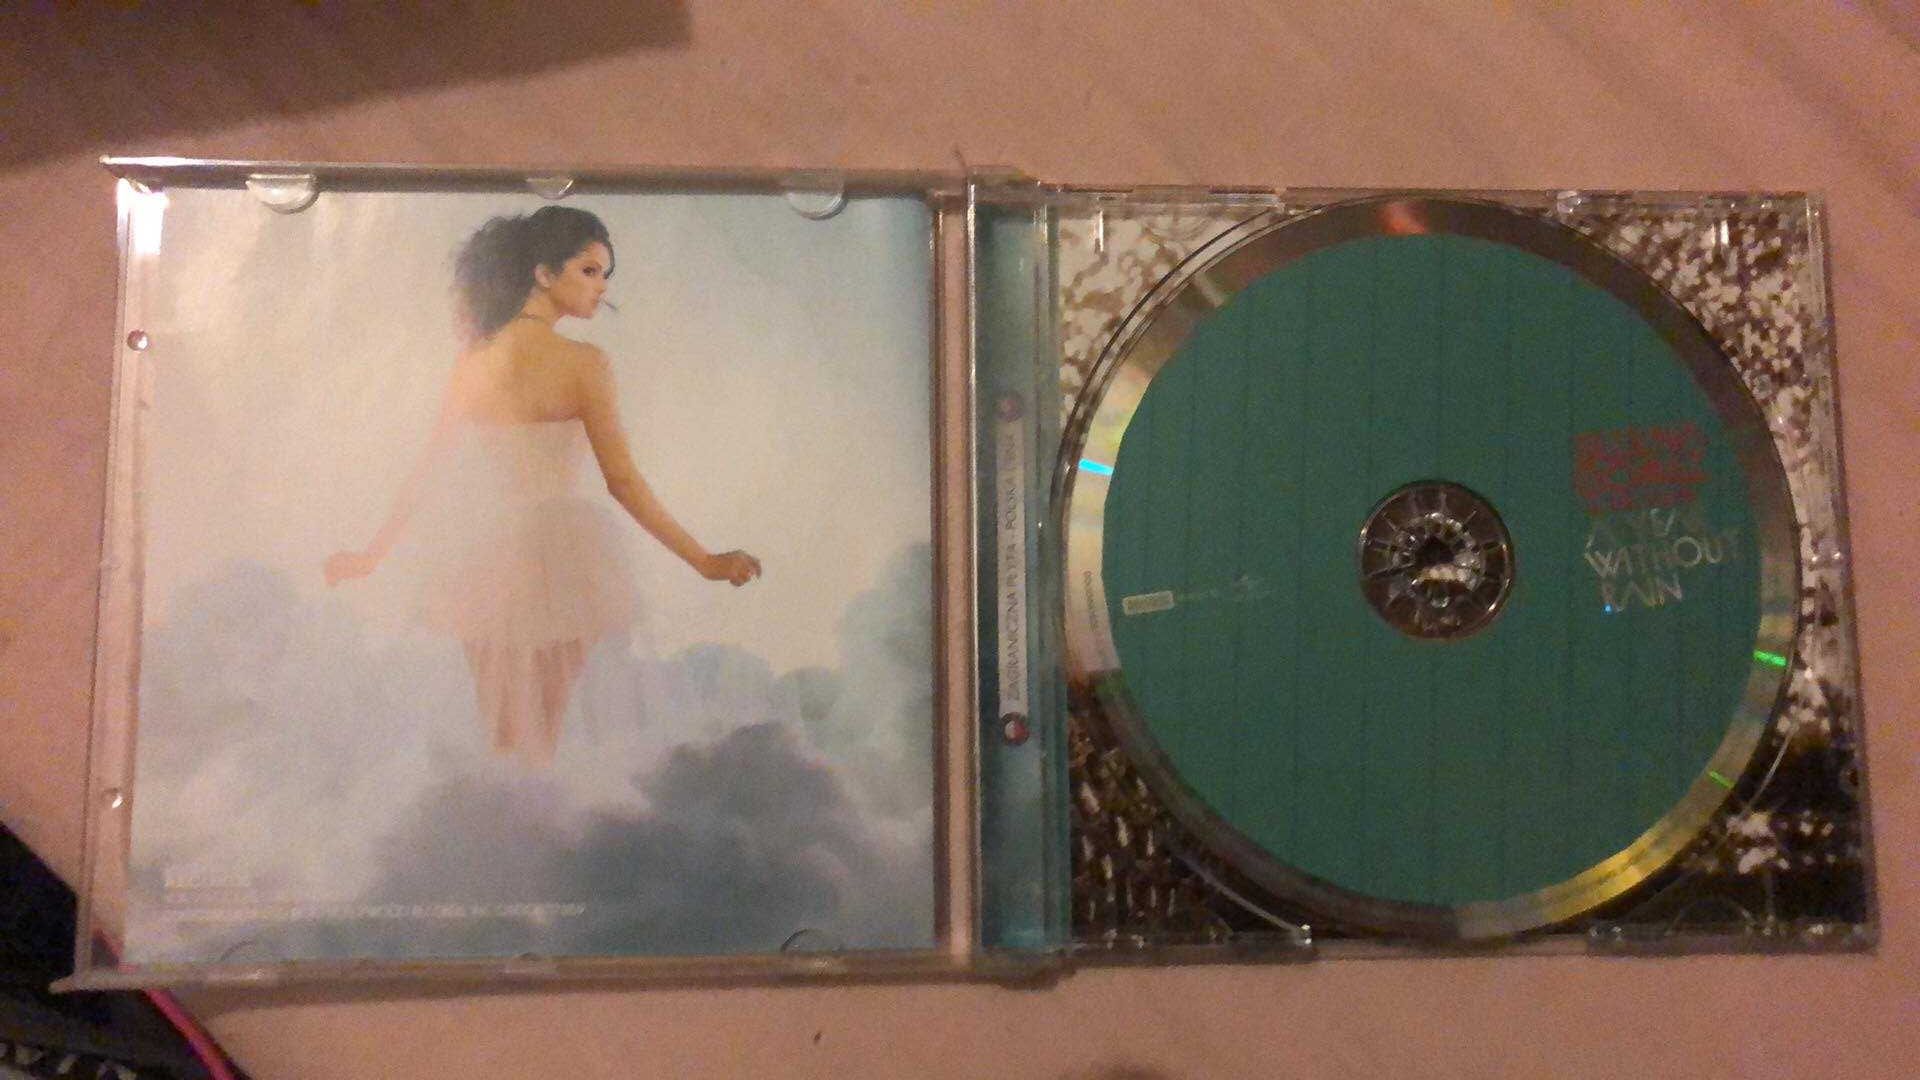 Selena Gomez-A Year Without Rain CD